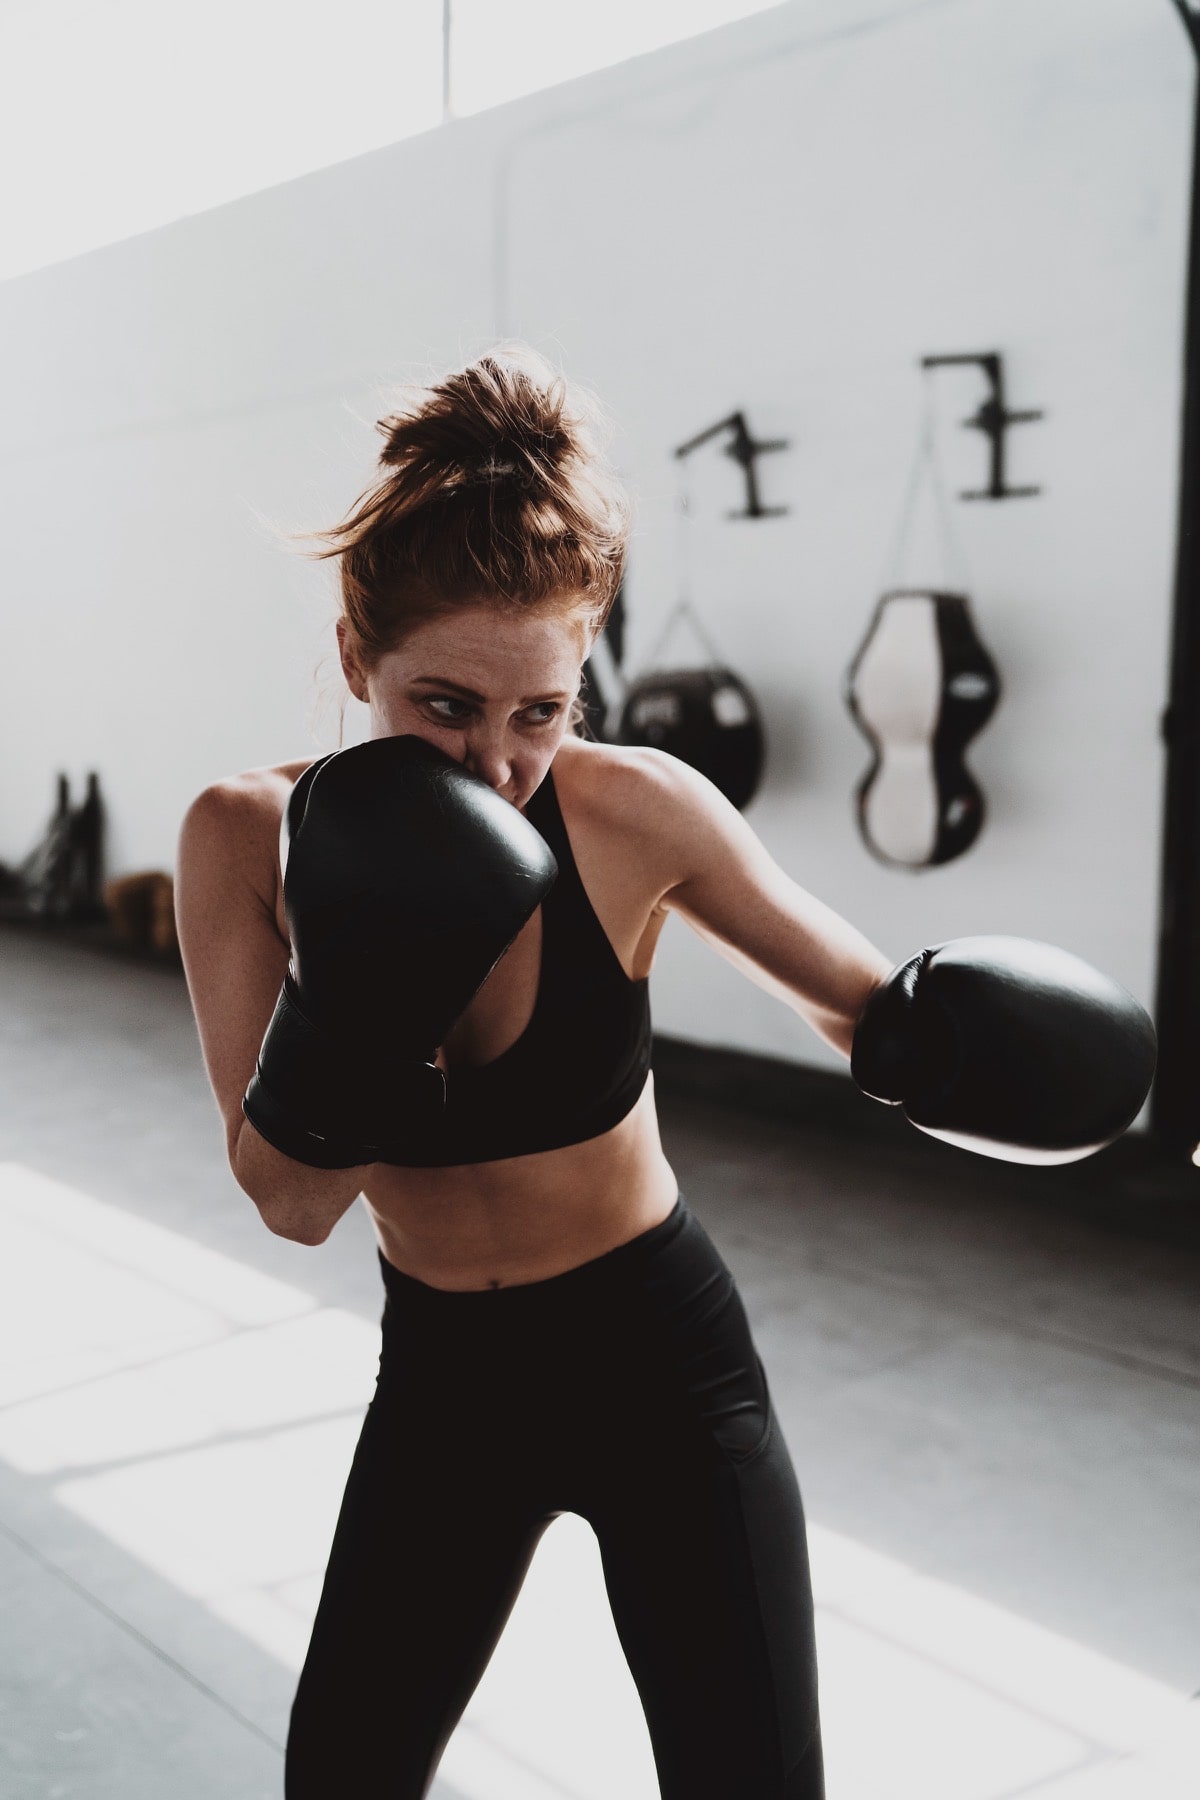 An image of a female boxer in a fight stance.